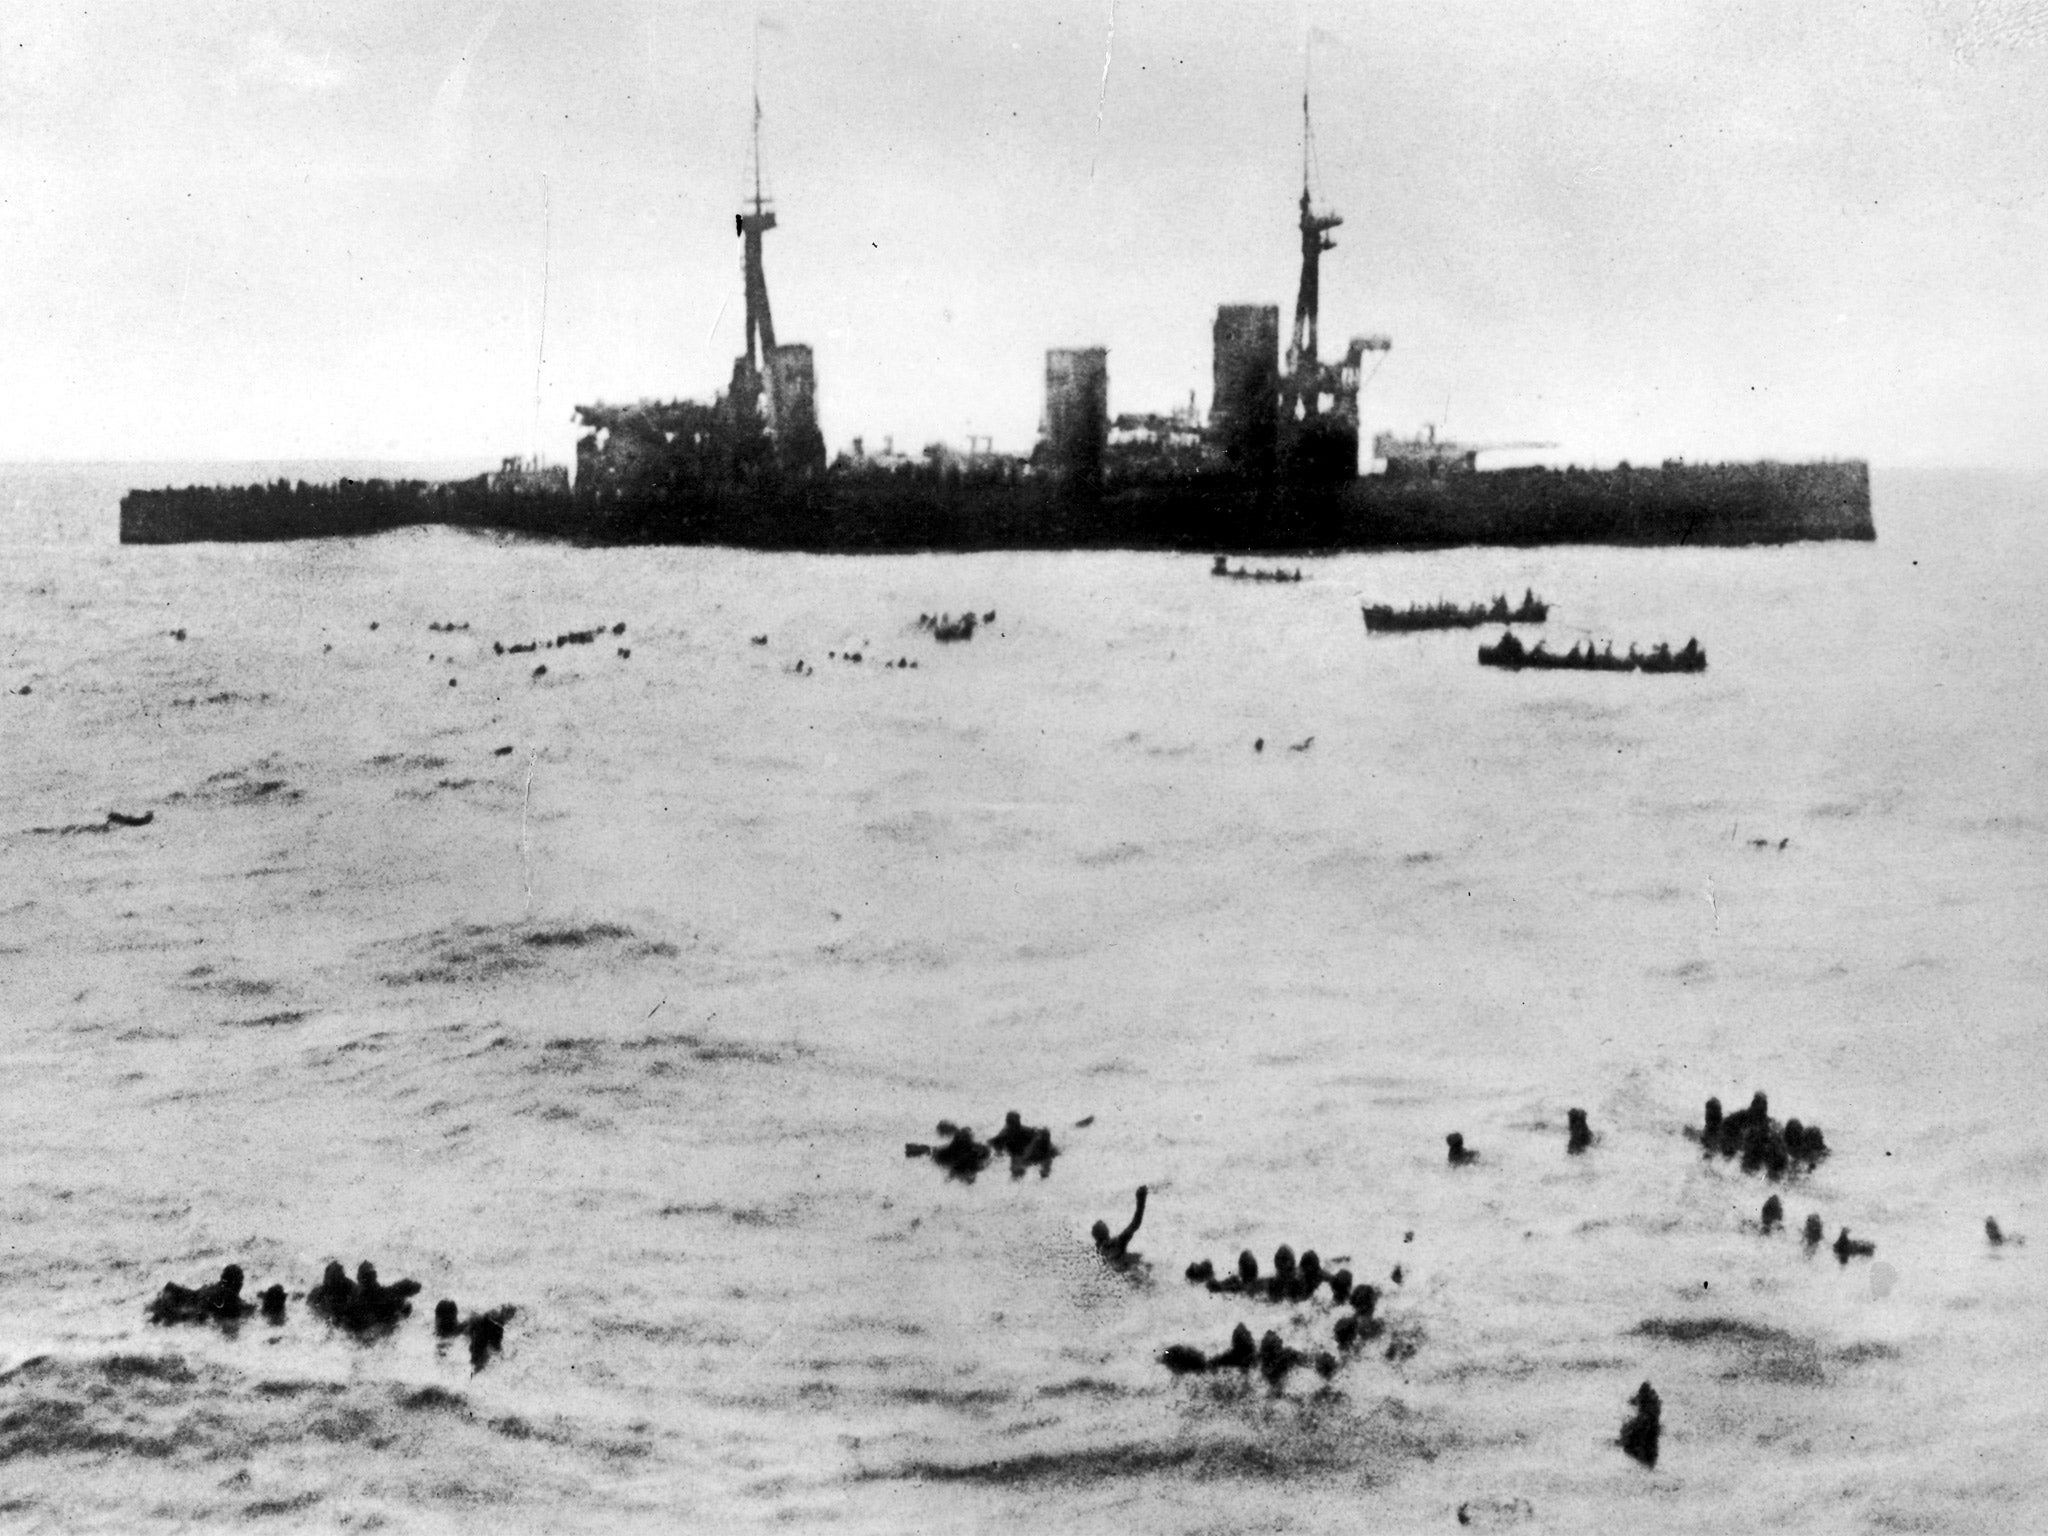 Survivors from SMS ‘Gneisenau’ in the sea off the Falkland Islands, with HMS ‘Inflexible’ in the background, 8 December 1914